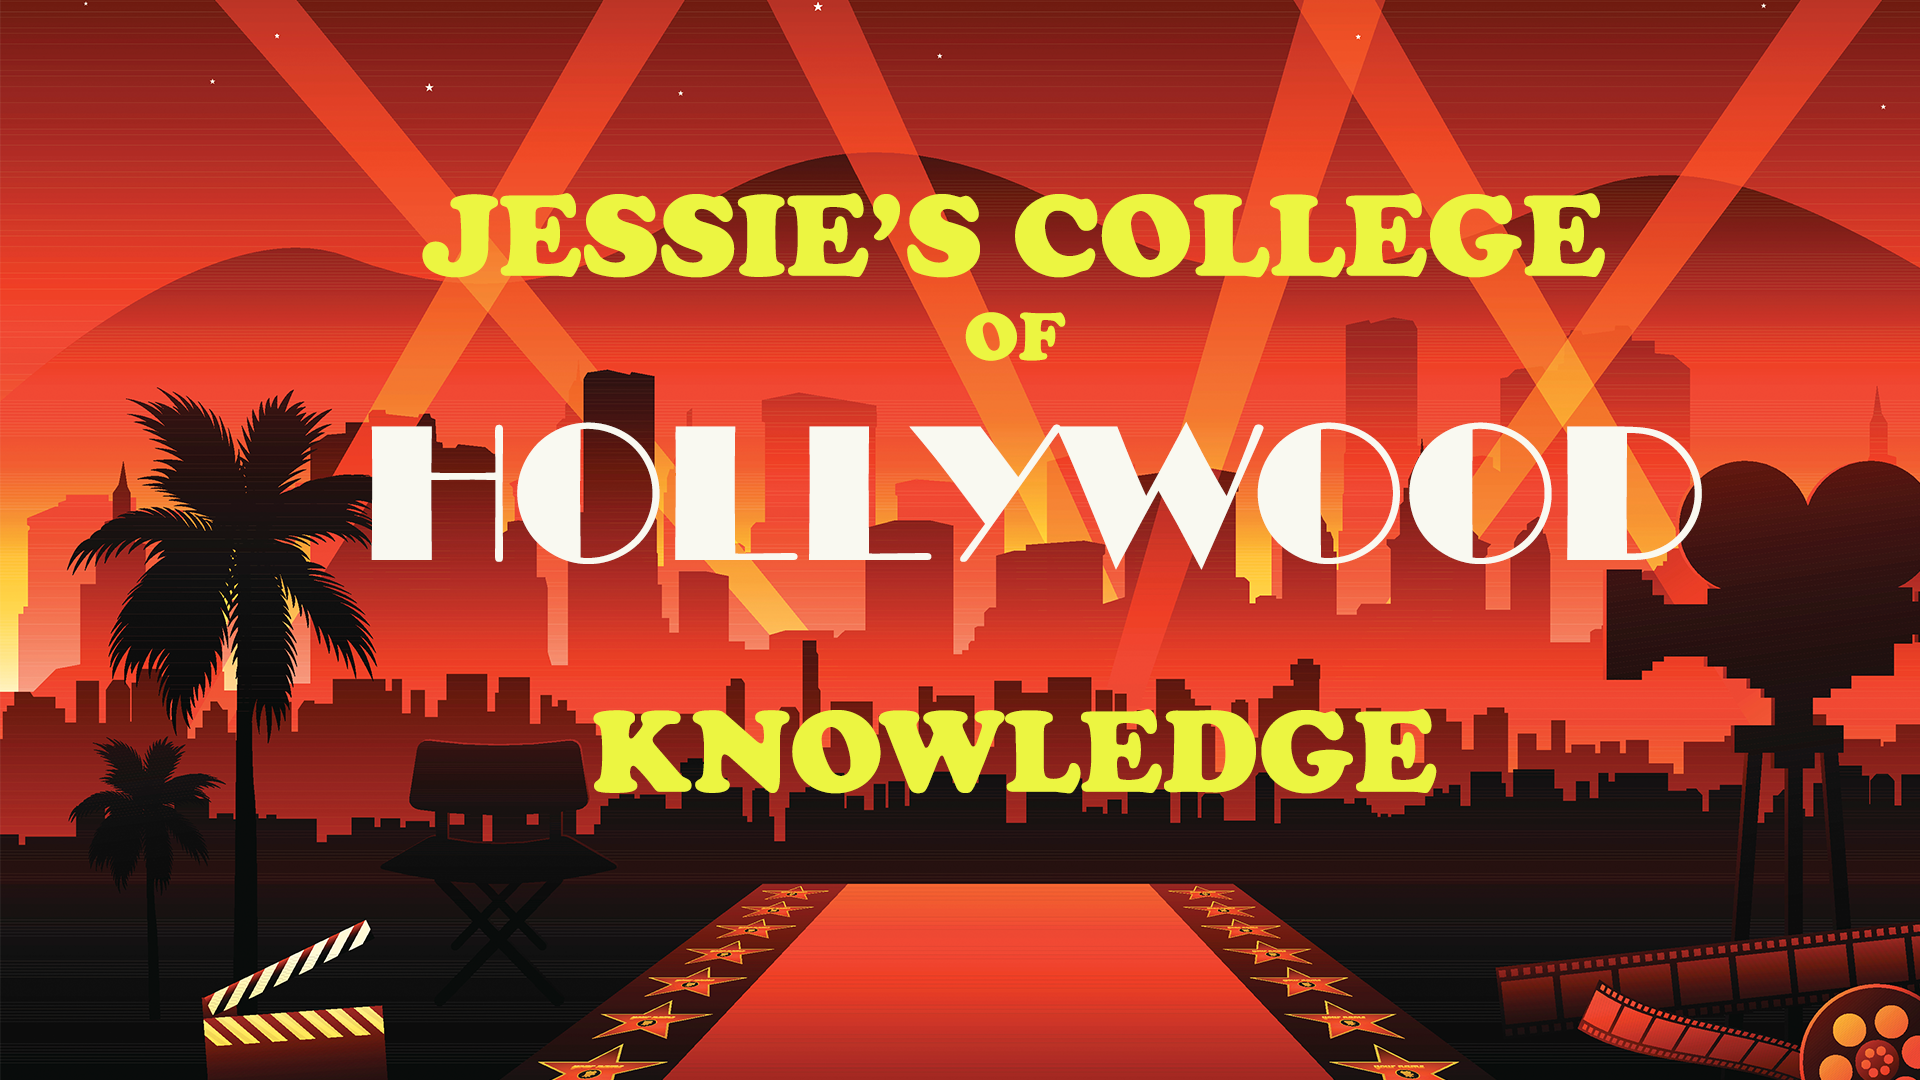 4/23/2024 7:40 Jessie's College of Hollywood Knowledge